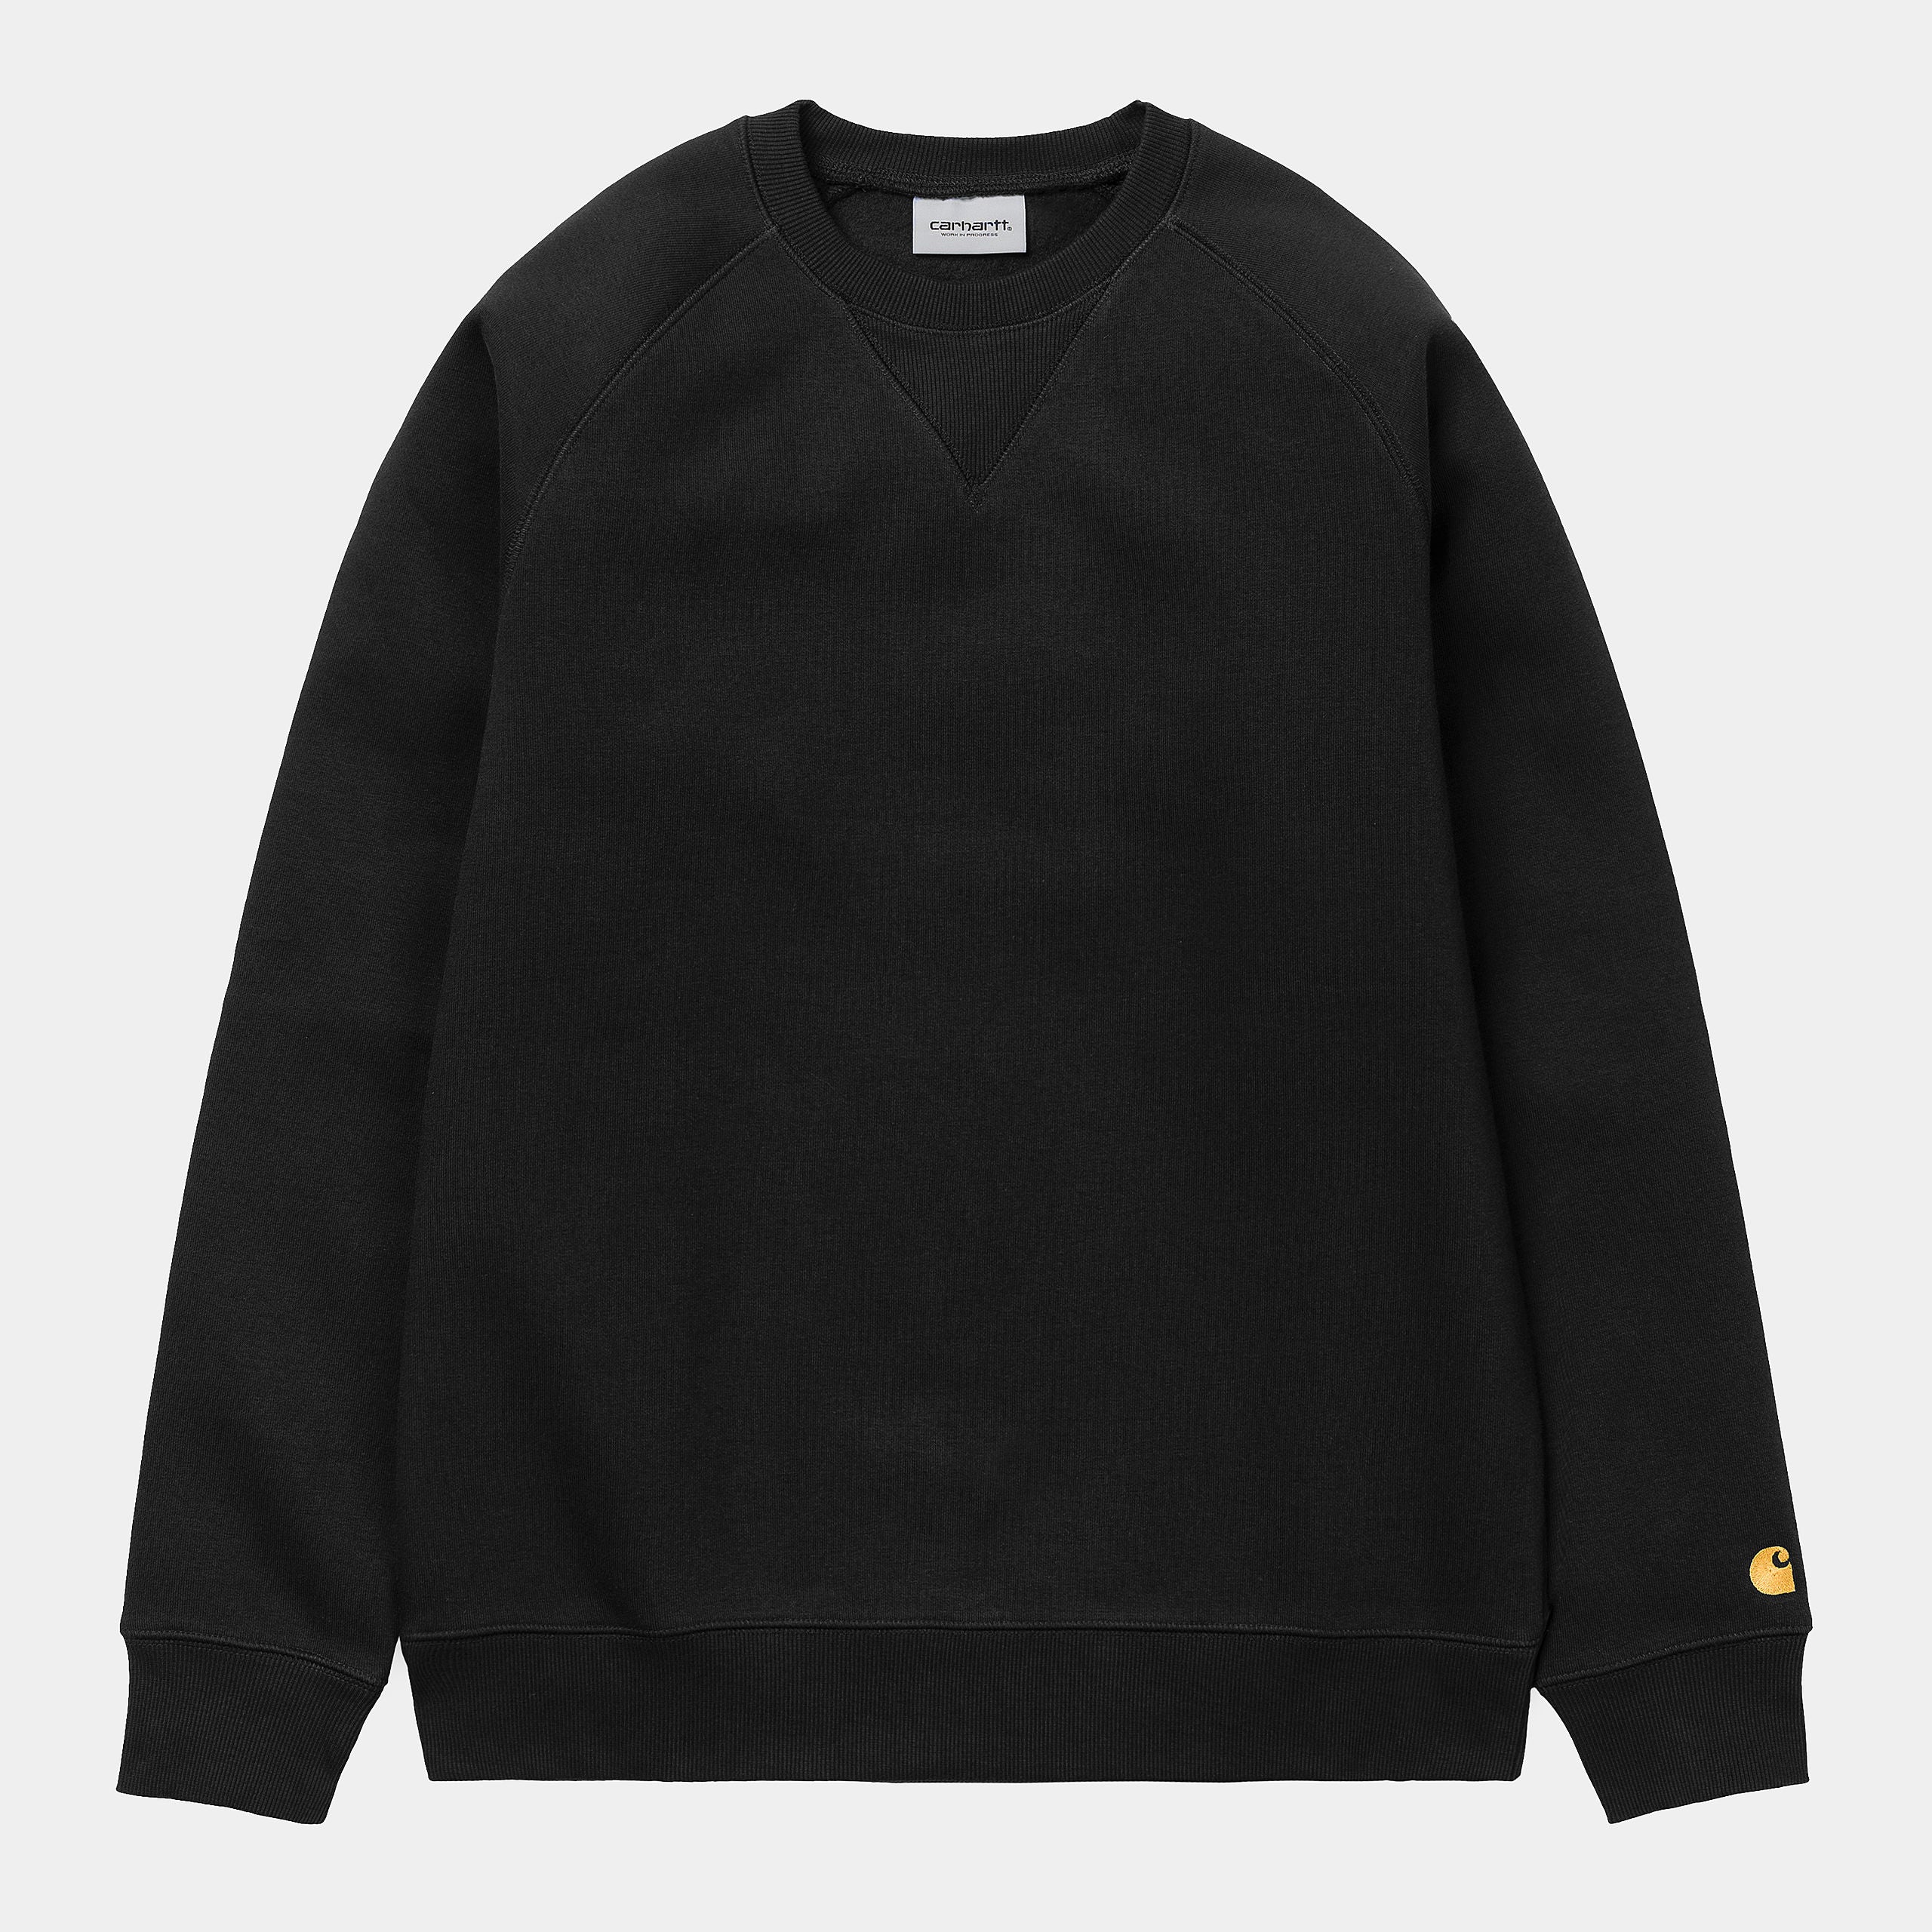 Carhartt Mens Chase Sweat Top - Black / Gold